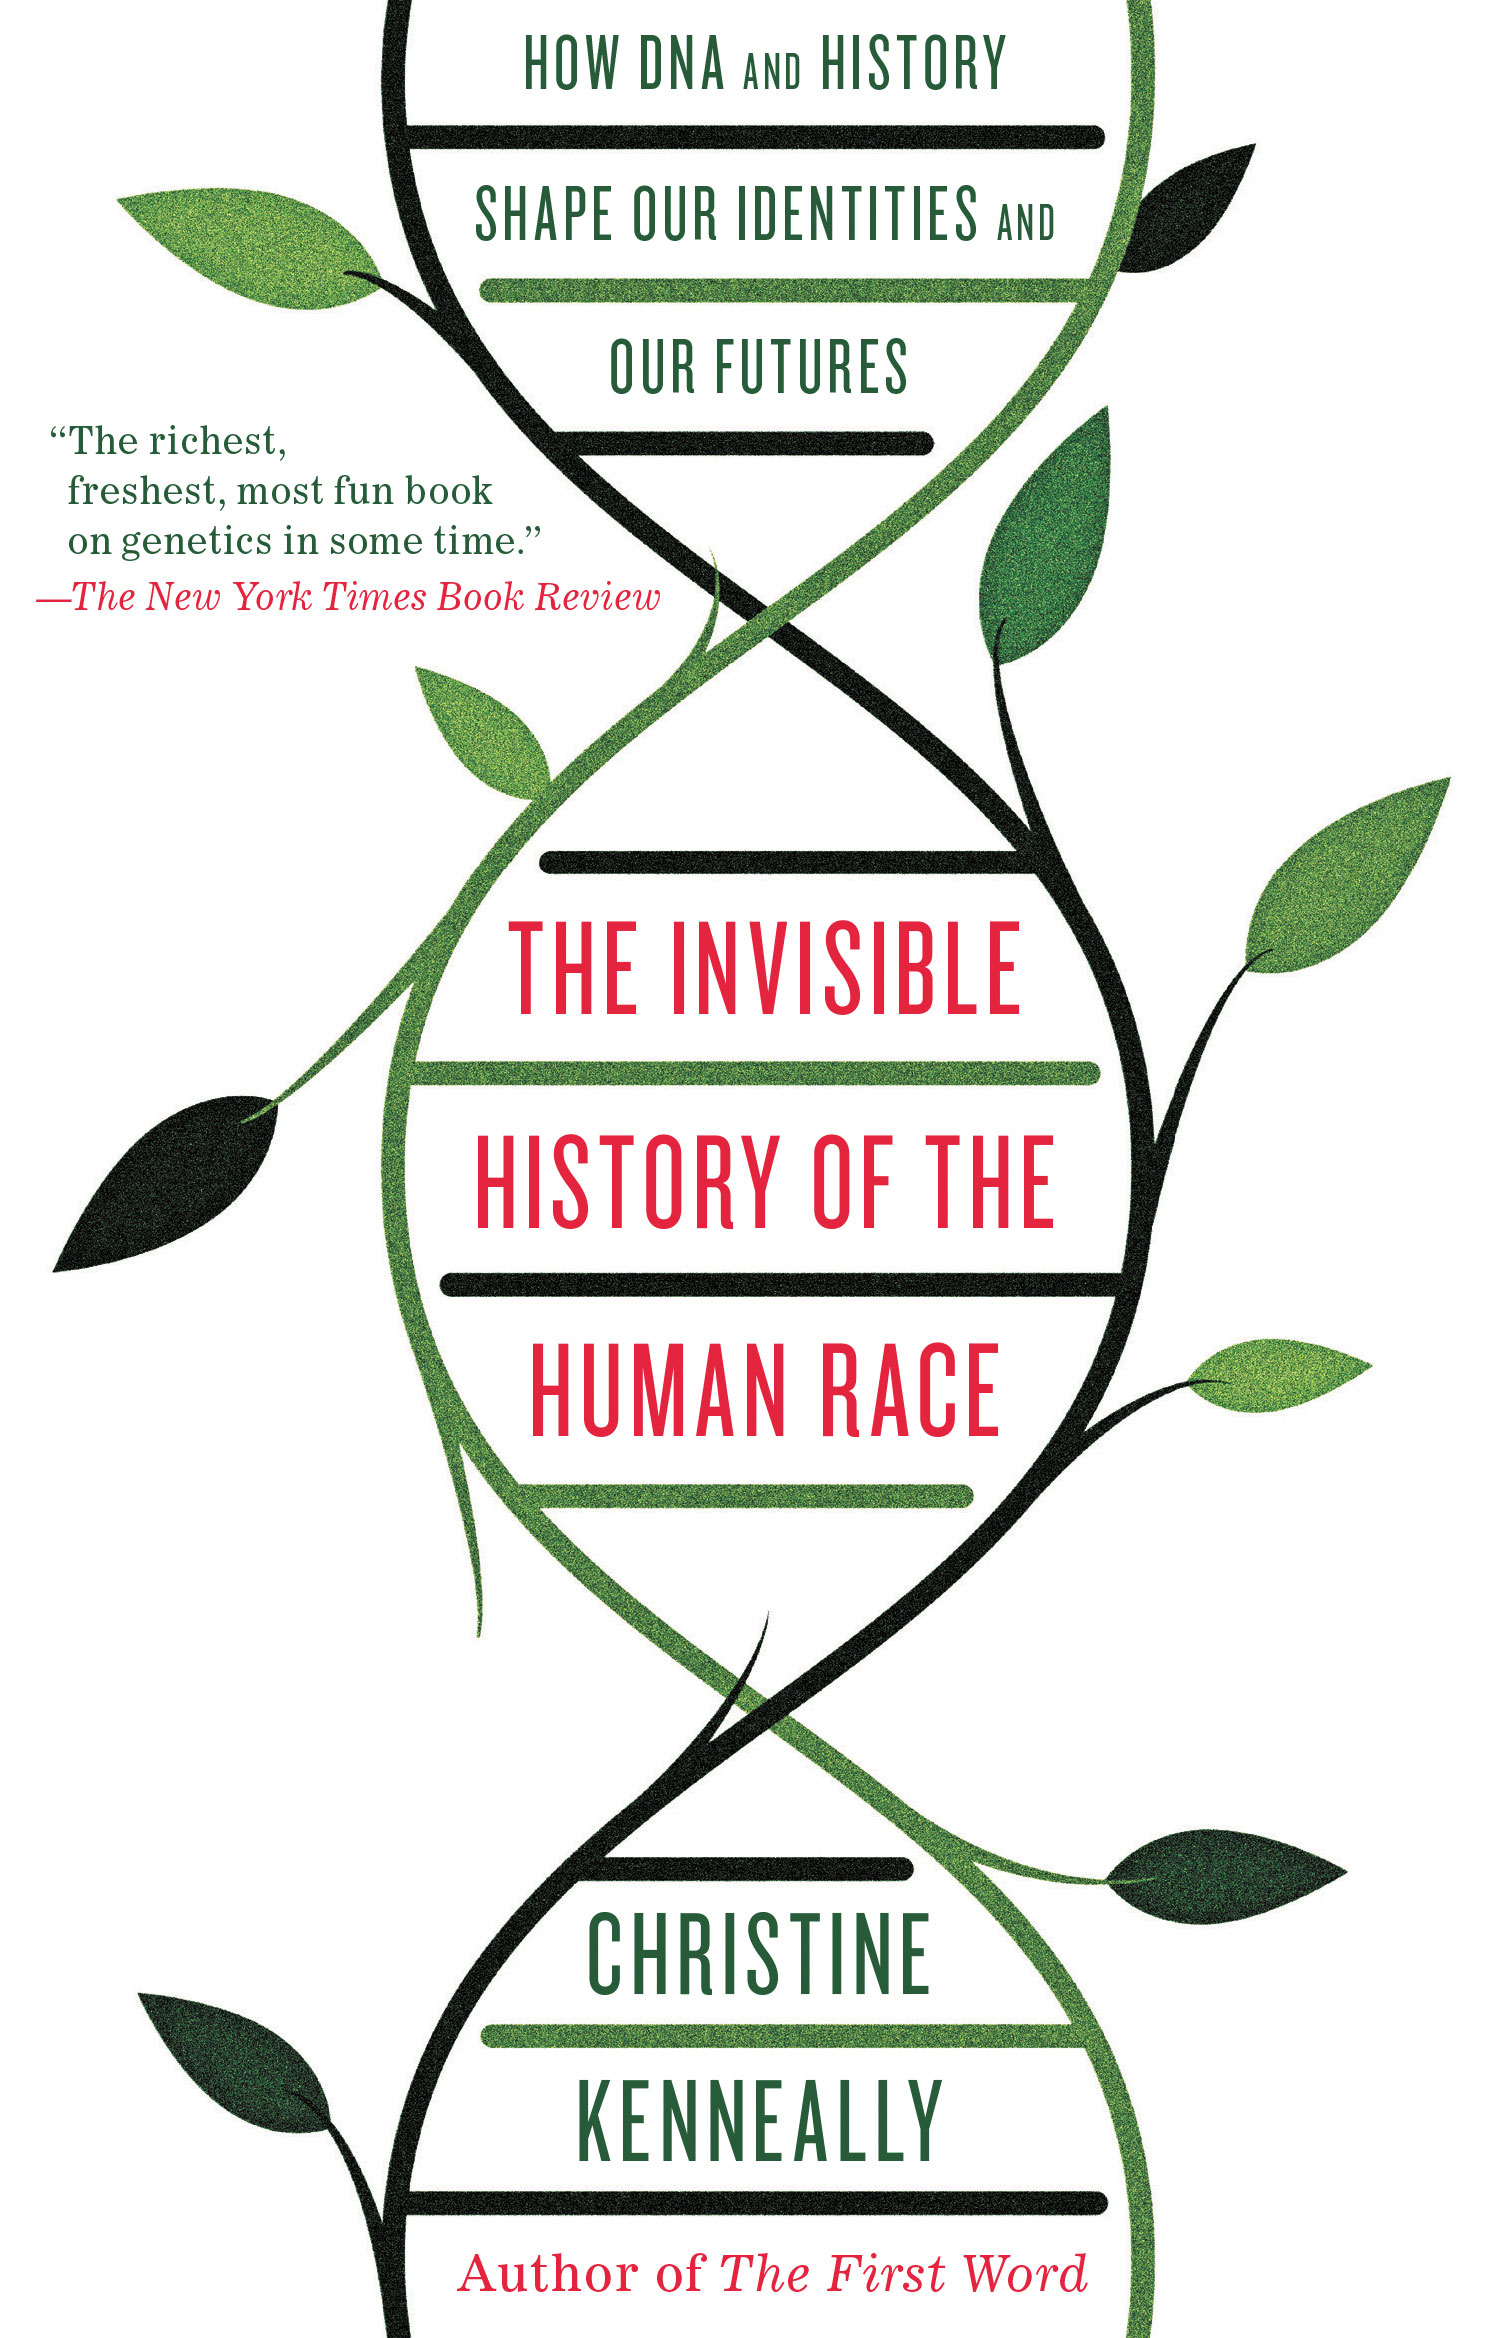 Book cover: The Invisible History of the Human Race by Christine Kenneally